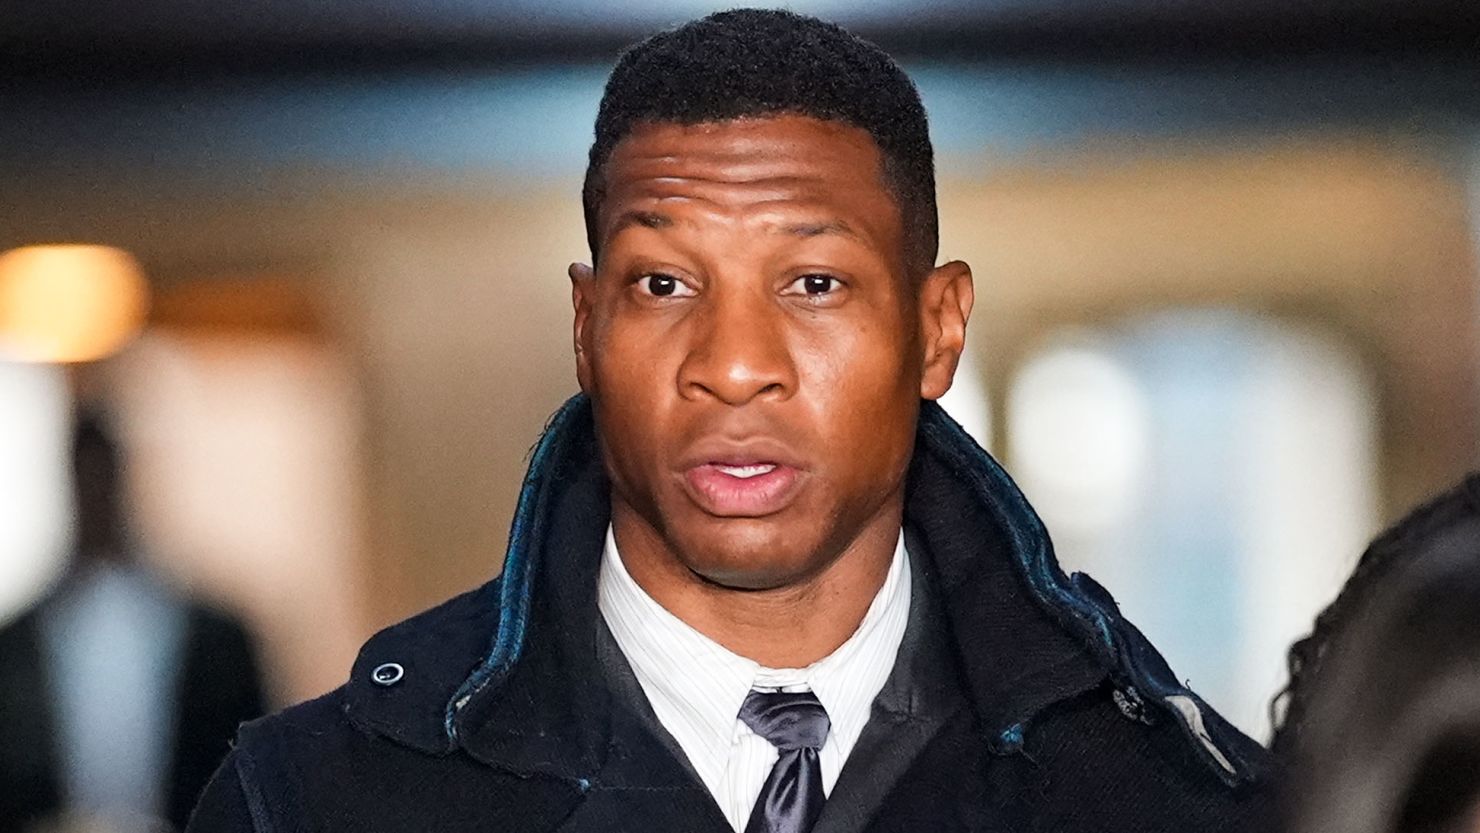 NEW YORK, NEW YORK - DECEMBER 15: Actor Jonathan Majors leaves the courthouse following closing arguments in Majors' domestic violence trial at Manhattan Criminal Court on December 15, 2023 in New York City. Majors had plead not guilty but faces up to a year in jail if convicted on misdemeanor charges of assault and harassment of an ex-girlfriend. (Photo by John Nacion/Getty Images)